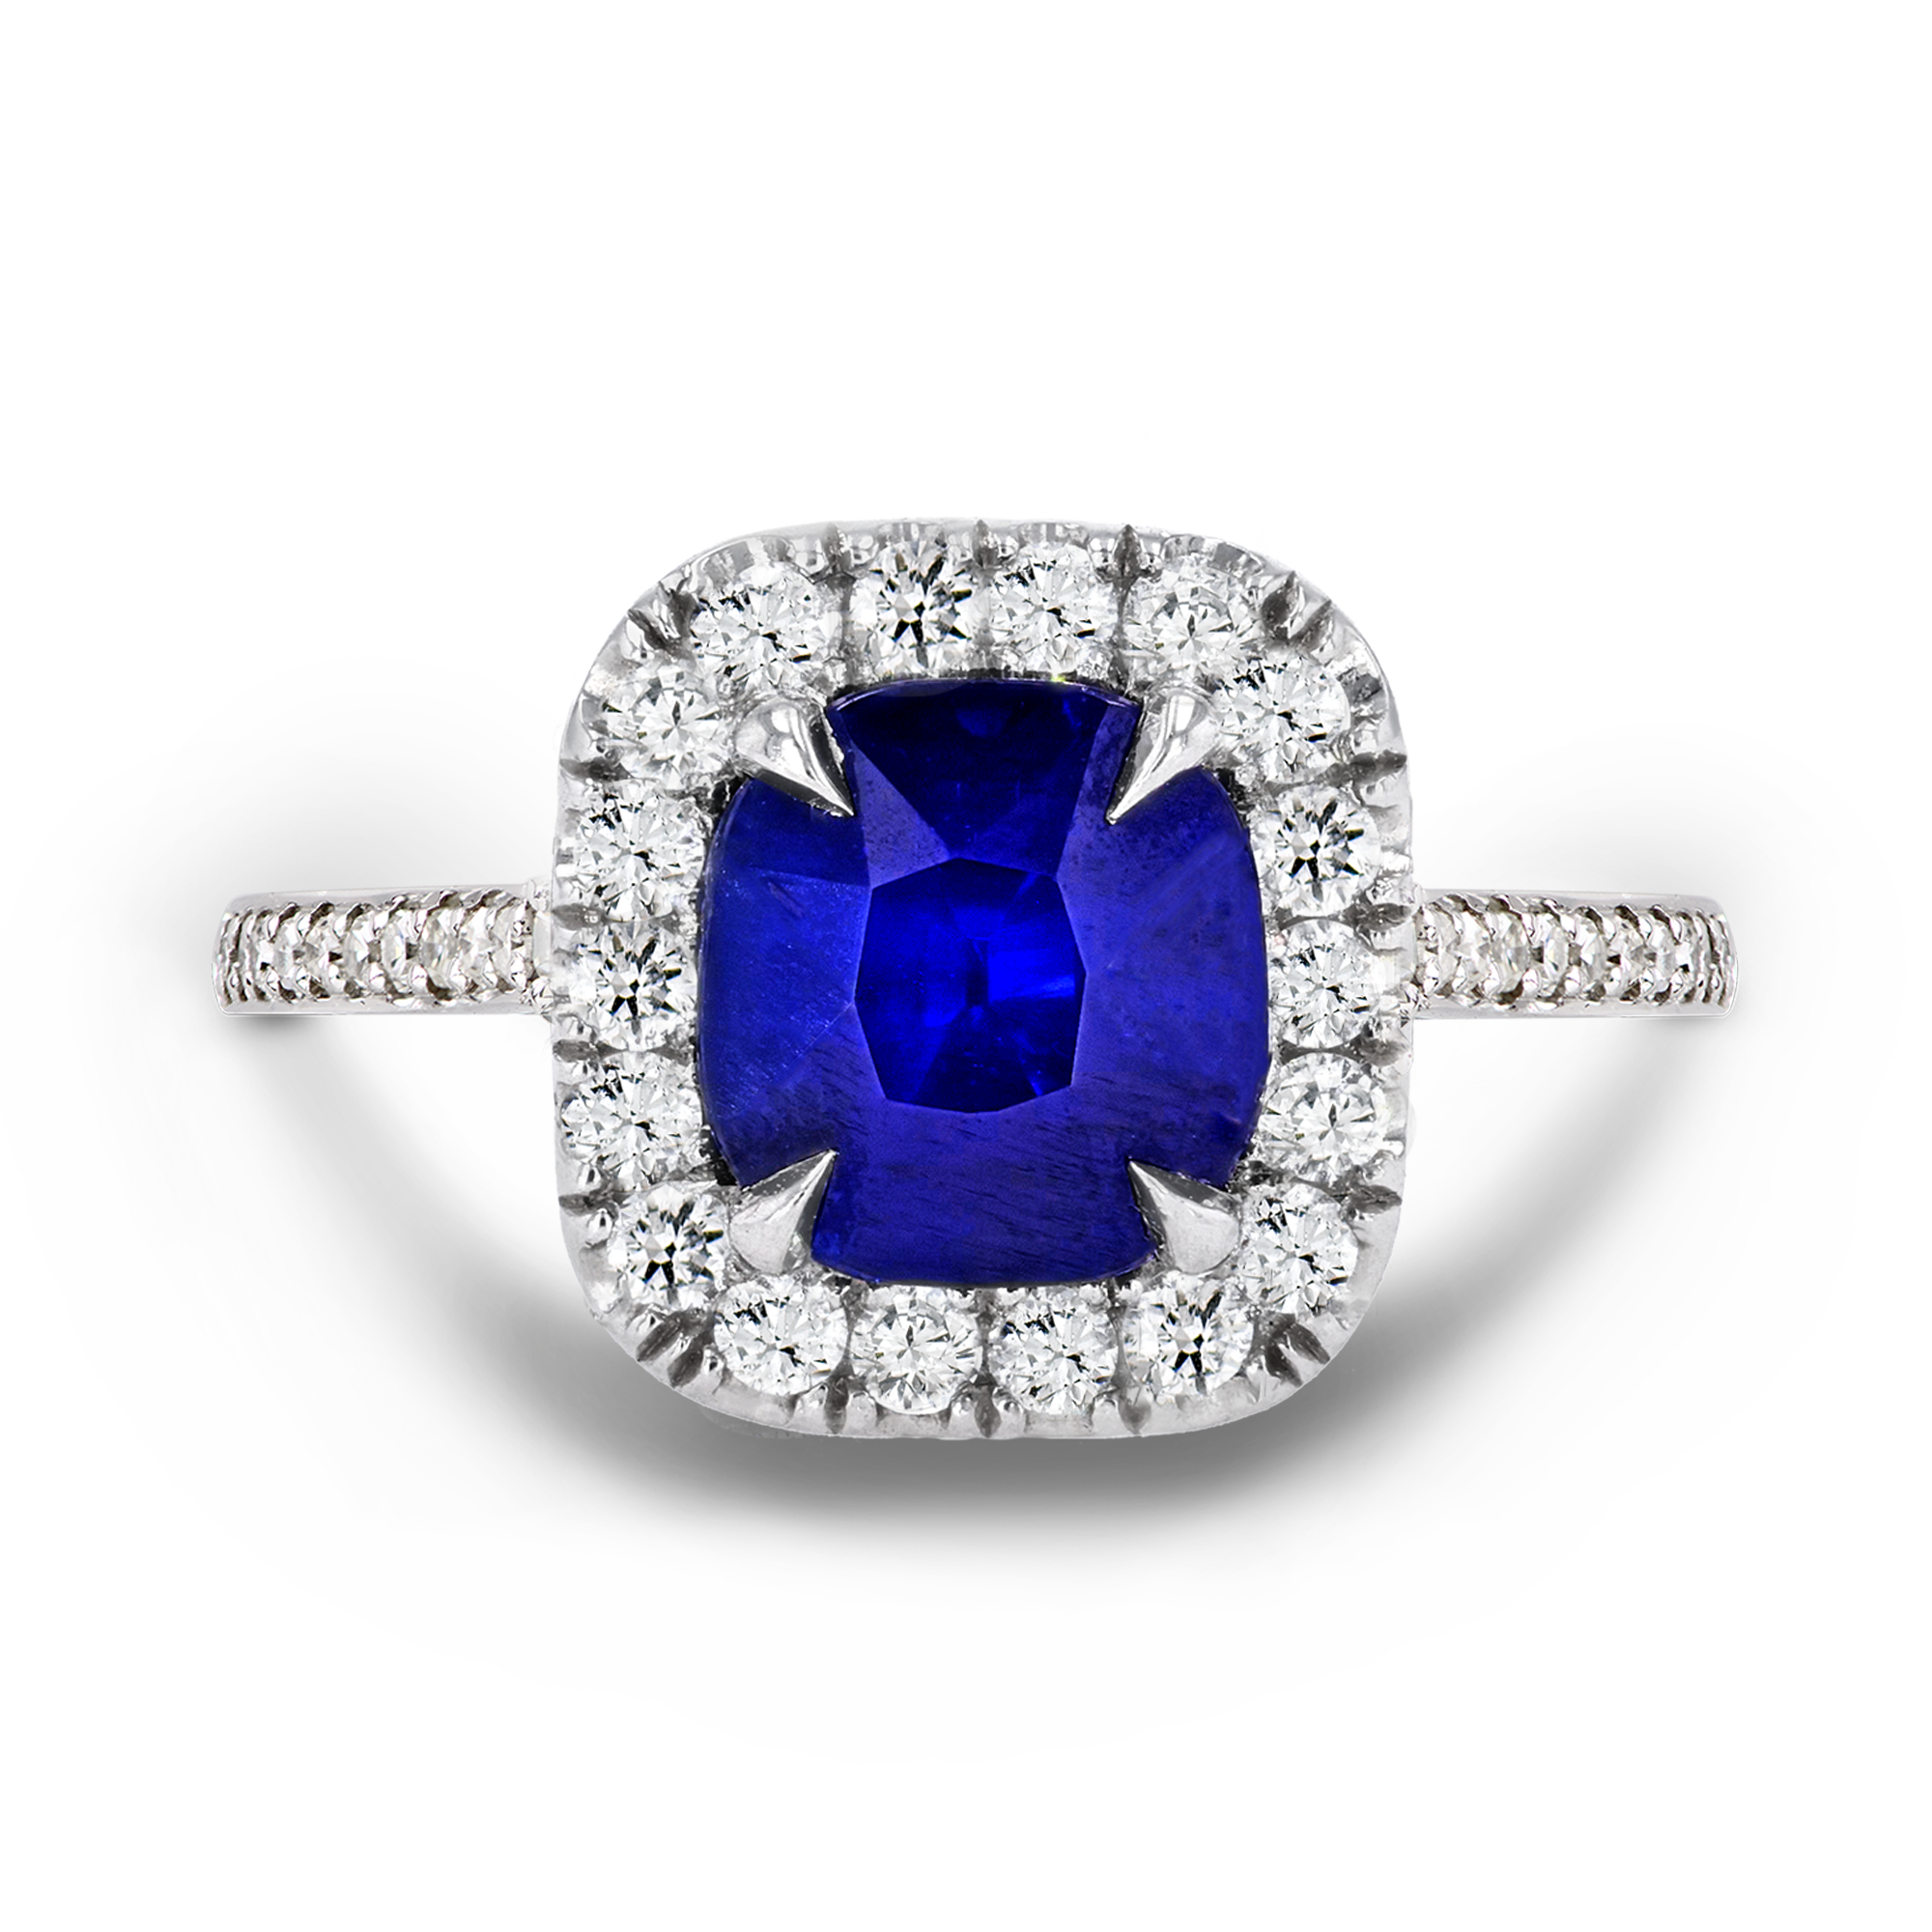 Celestial 0.94ct Sapphire and Diamond Cluster Ring Cushion Antique Cut, Claw Set_2